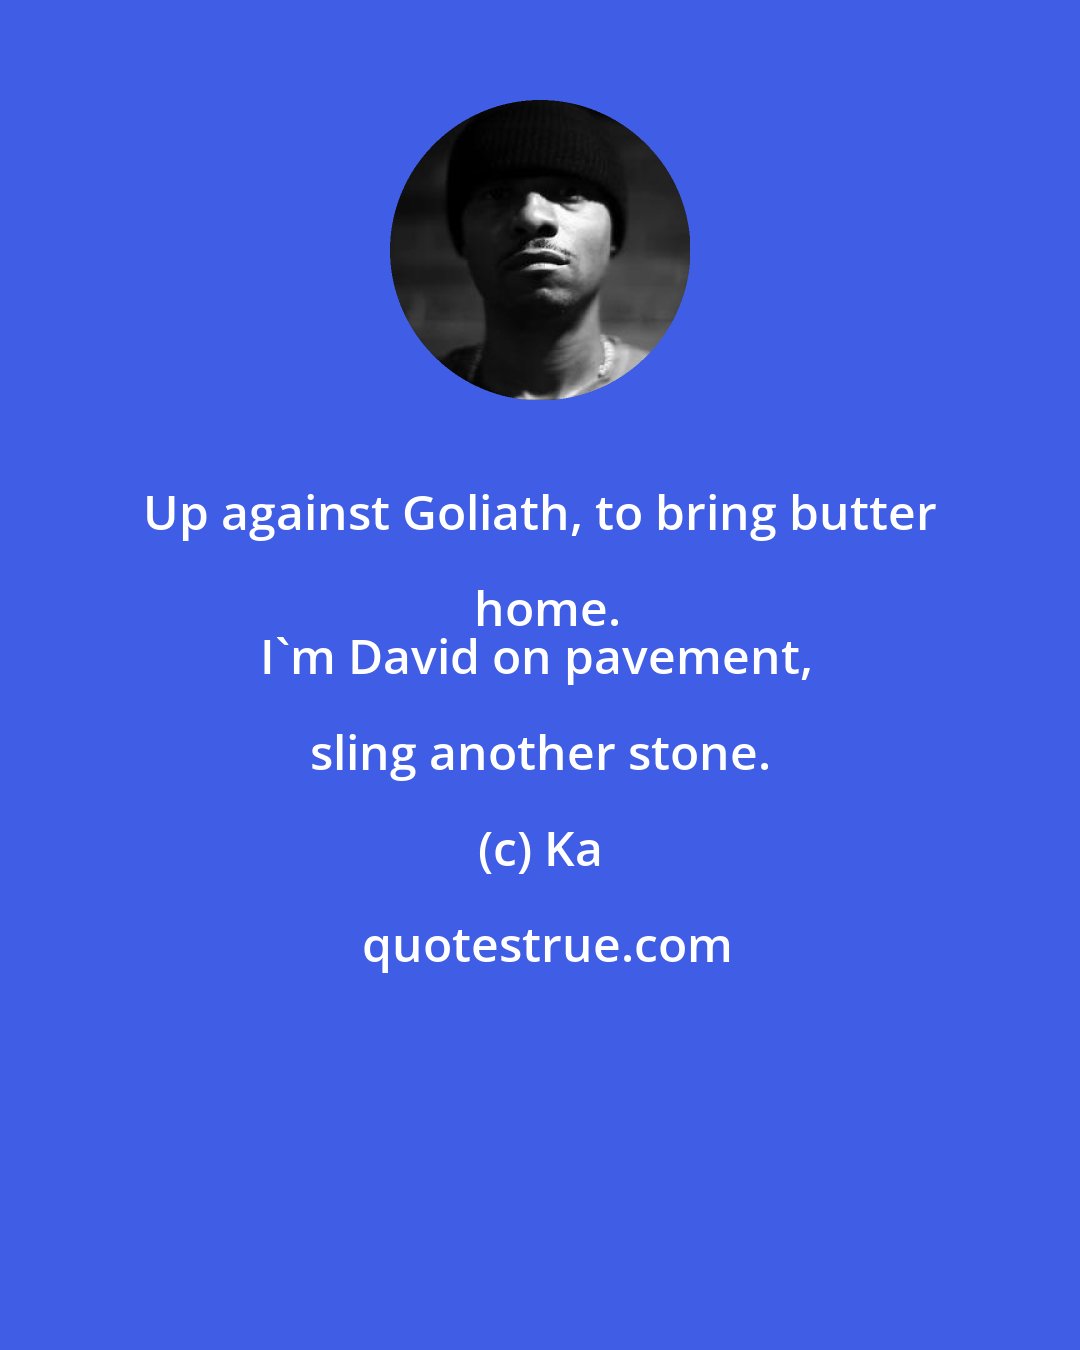 Ka: Up against Goliath, to bring butter home.
I'm David on pavement, sling another stone.